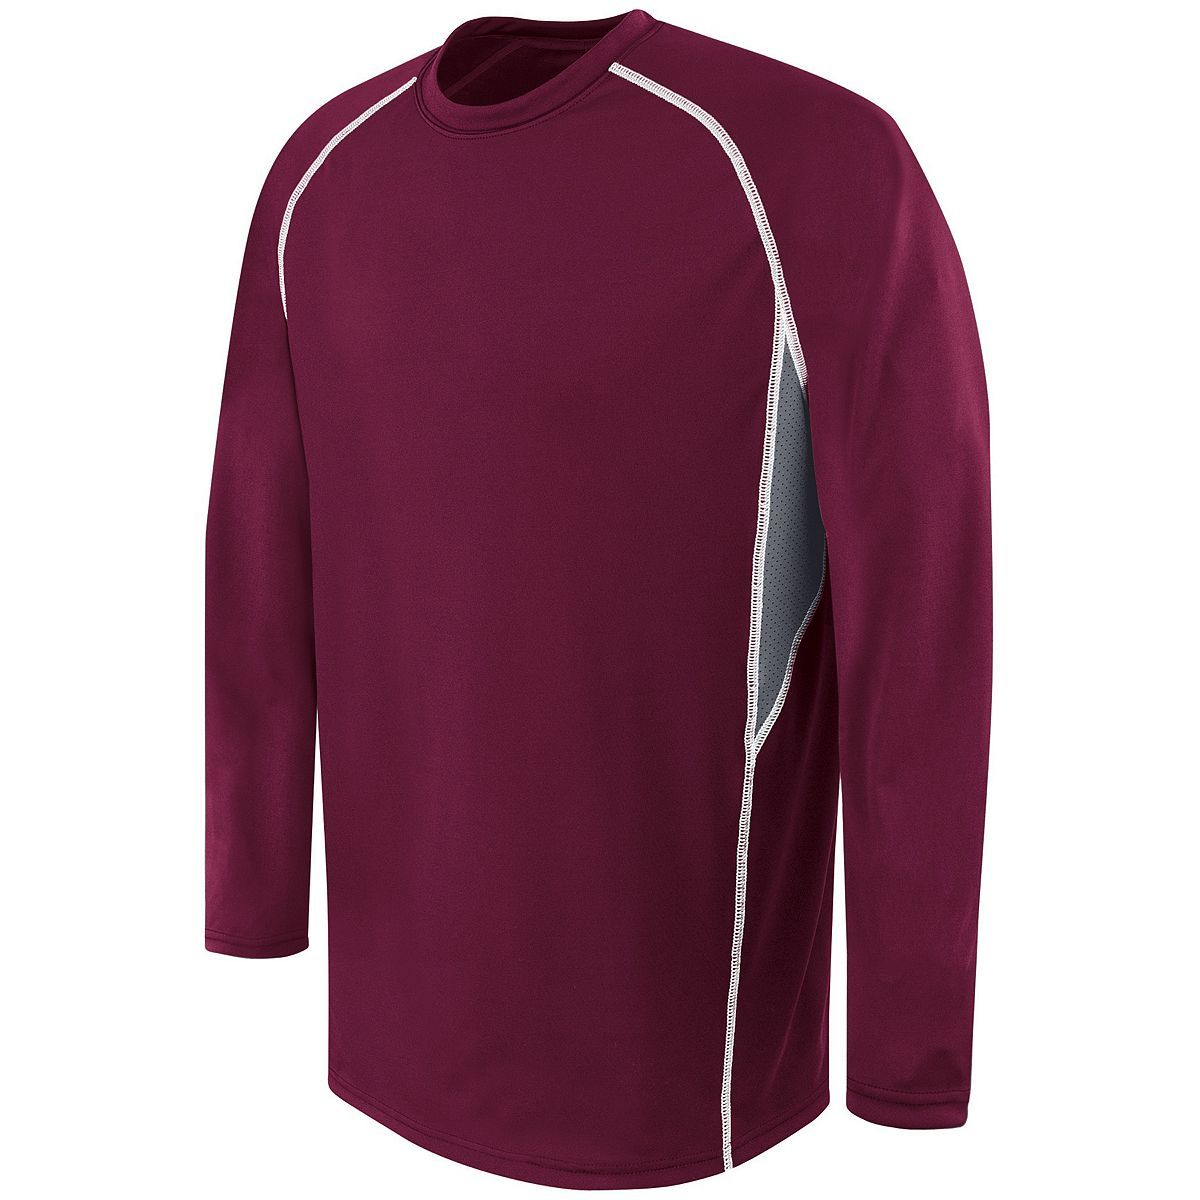 High 5 Adult Long Sleeve Evolution Top in Maroon/Graphite/White  -Part of the Adult, High5-Products, Shirts product lines at KanaleyCreations.com